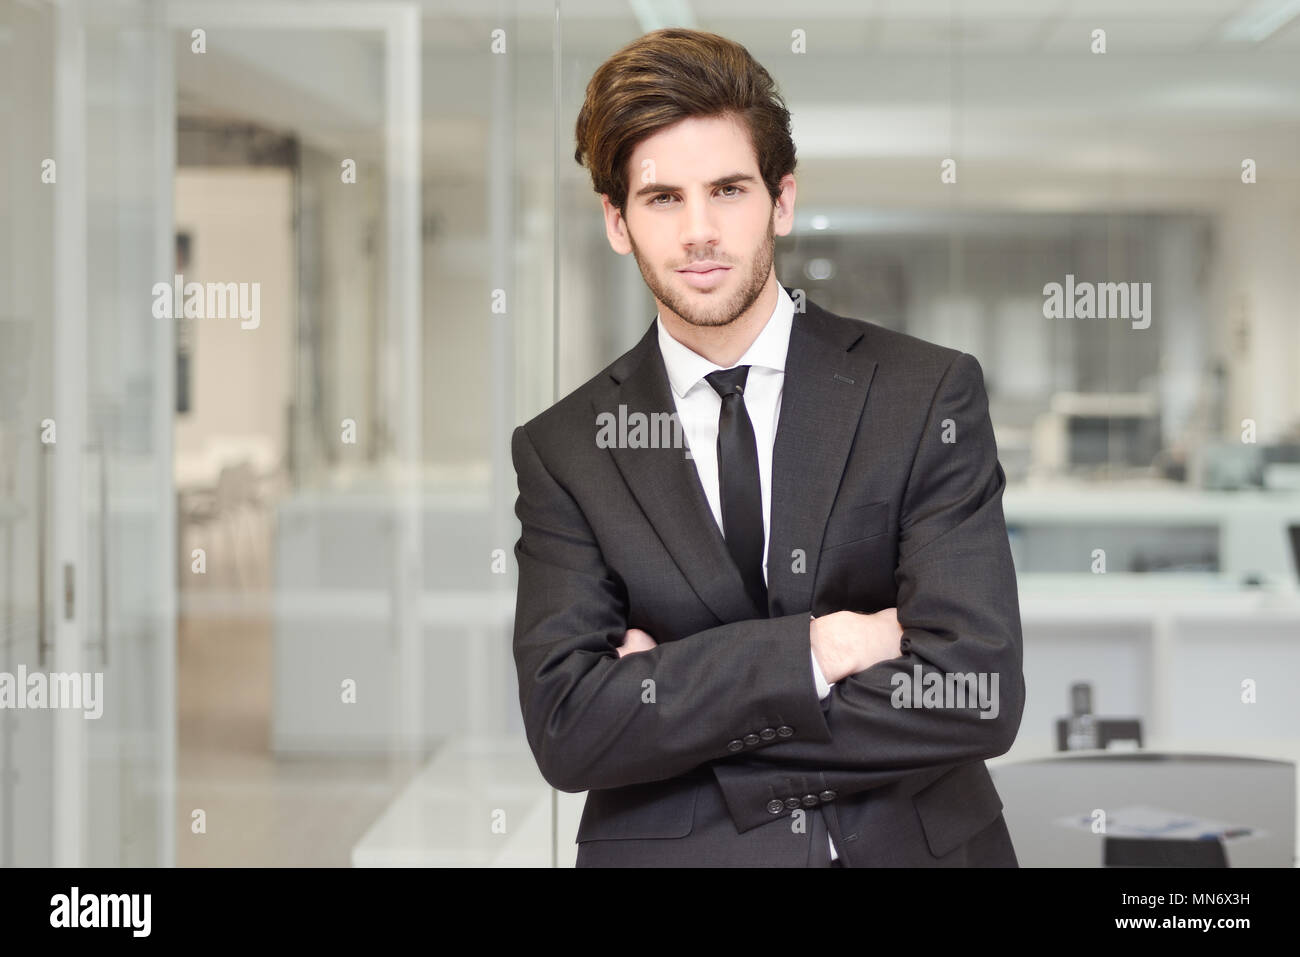 Portrait of a young businessman in an office Stock Photo